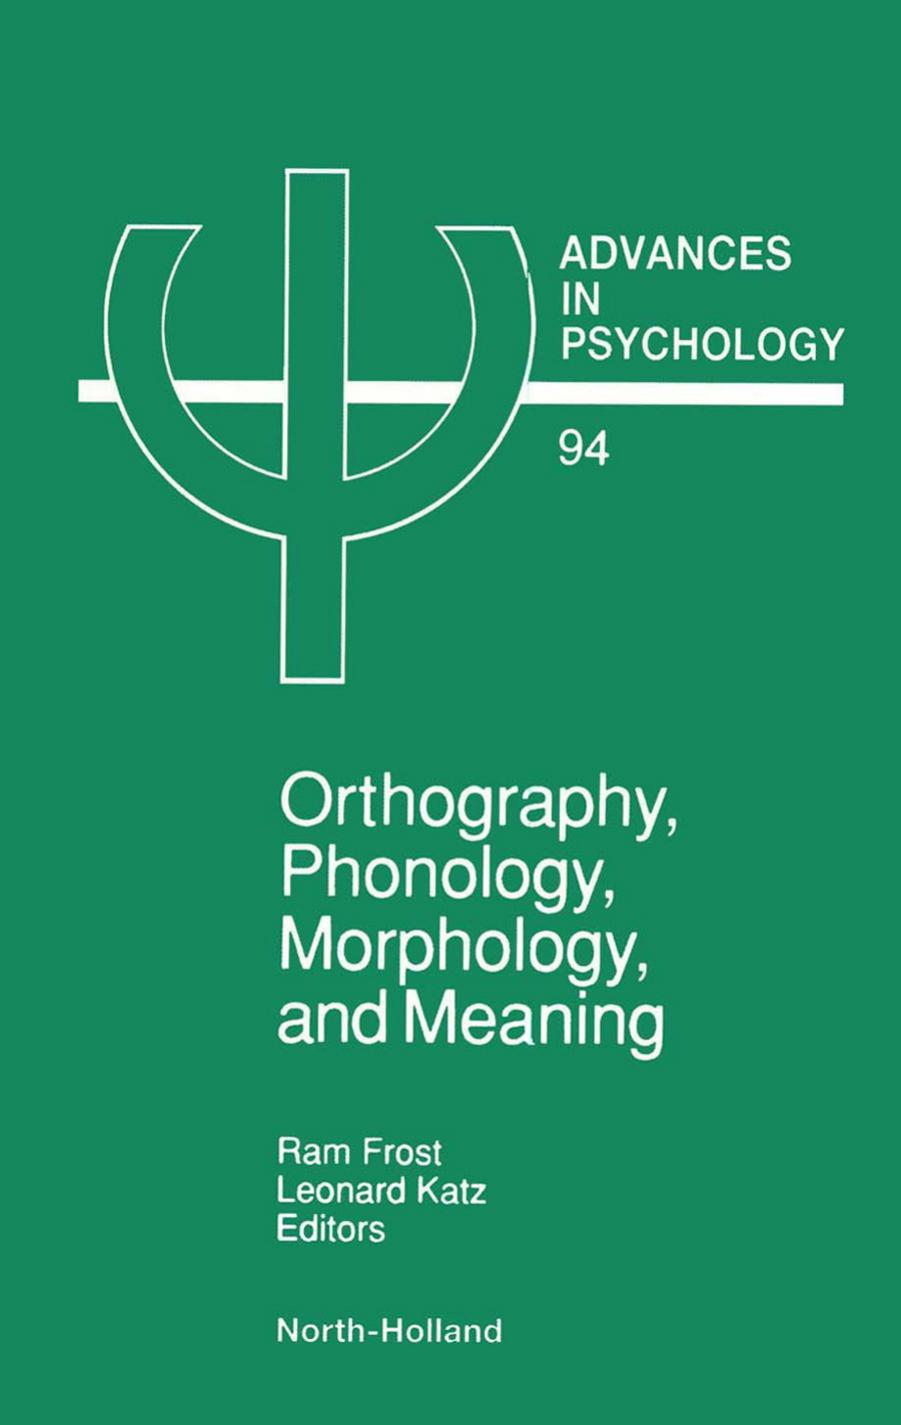 Orthography, Phonology, Morphology, and Meaning